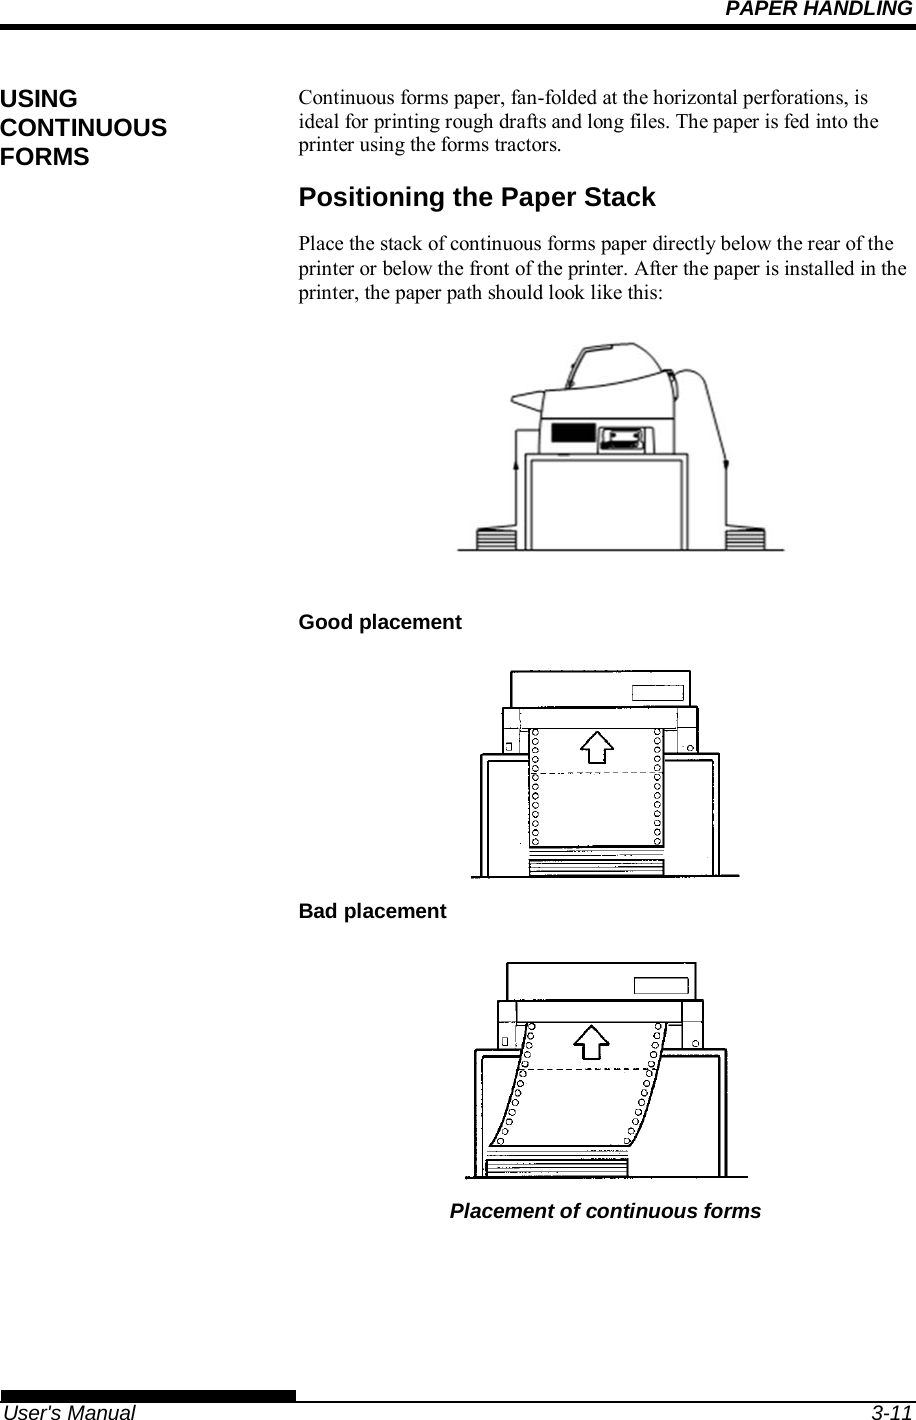 PAPER HANDLING   User&apos;s Manual  3-11 Continuous forms paper, fan-folded at the horizontal perforations, is ideal for printing rough drafts and long files. The paper is fed into the printer using the forms tractors. Positioning the Paper Stack Place the stack of continuous forms paper directly below the rear of the printer or below the front of the printer. After the paper is installed in the printer, the paper path should look like this:  Good placement  Bad placement  Placement of continuous forms USING CONTINUOUS FORMS 